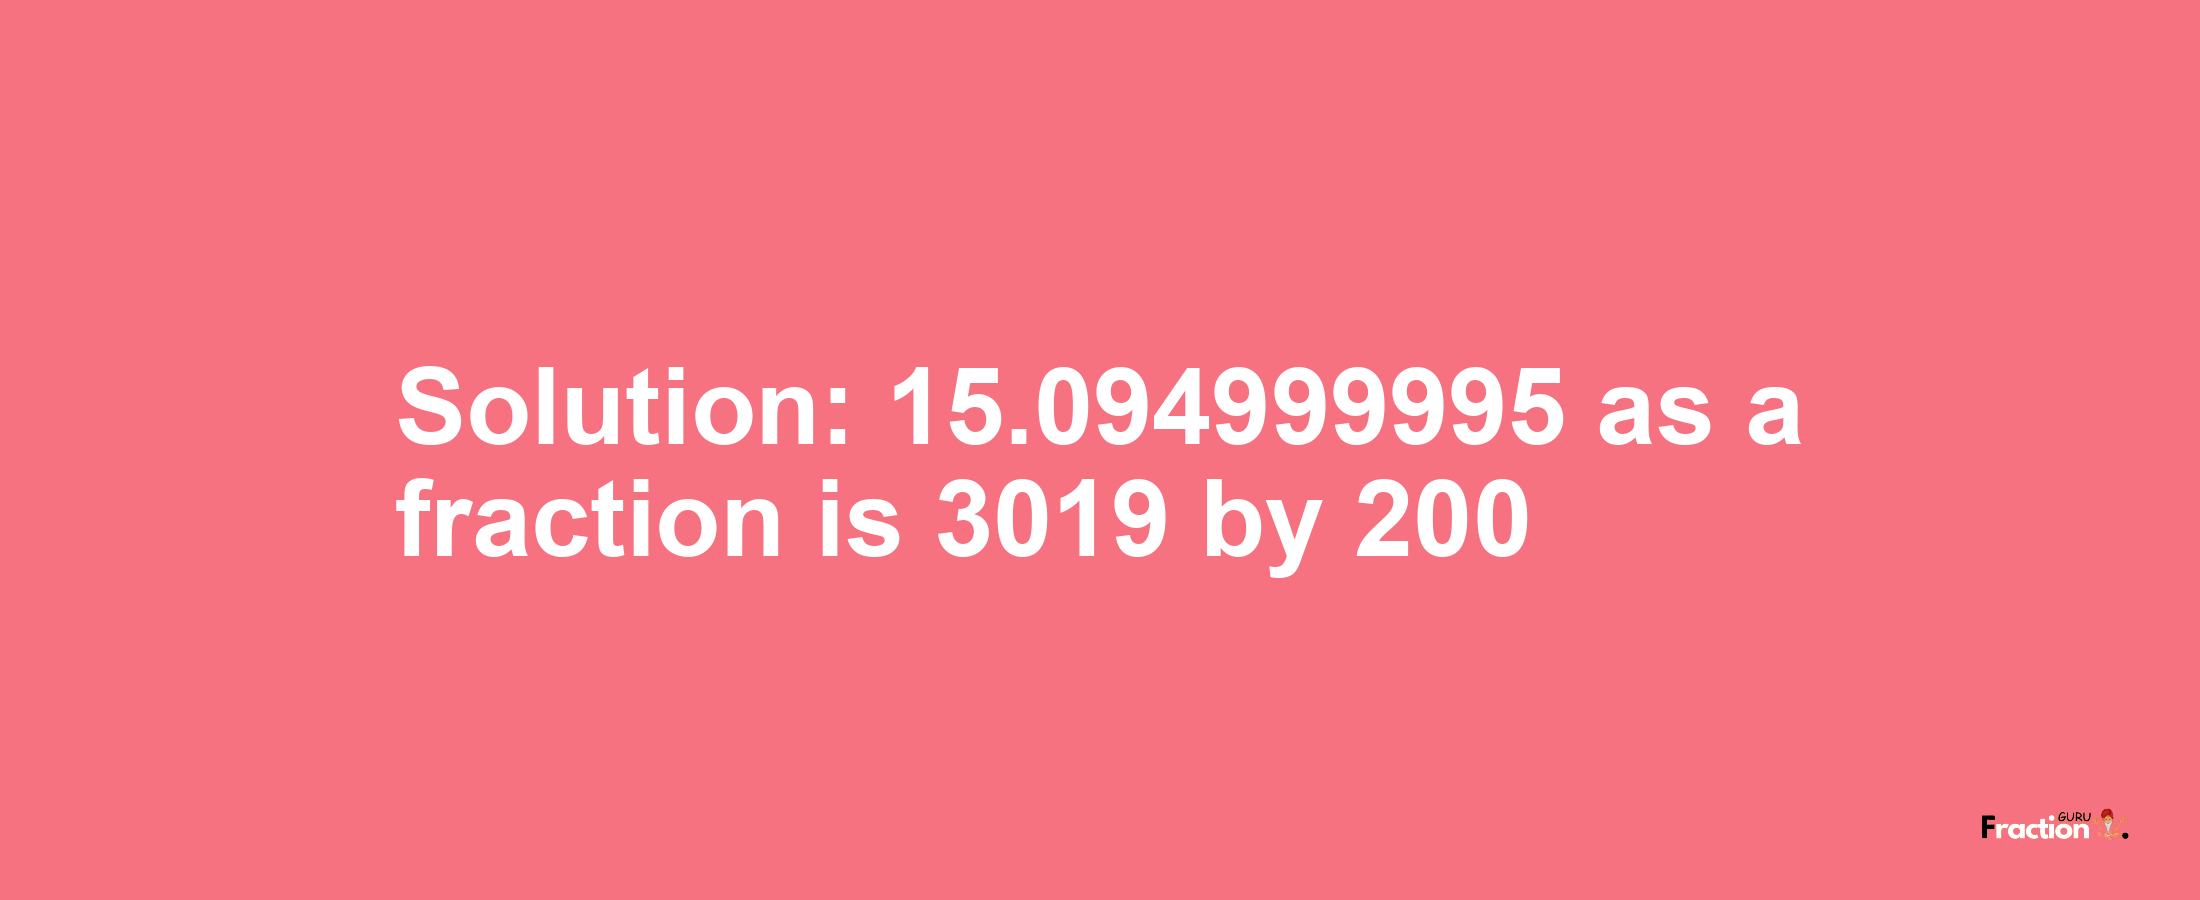 Solution:15.094999995 as a fraction is 3019/200